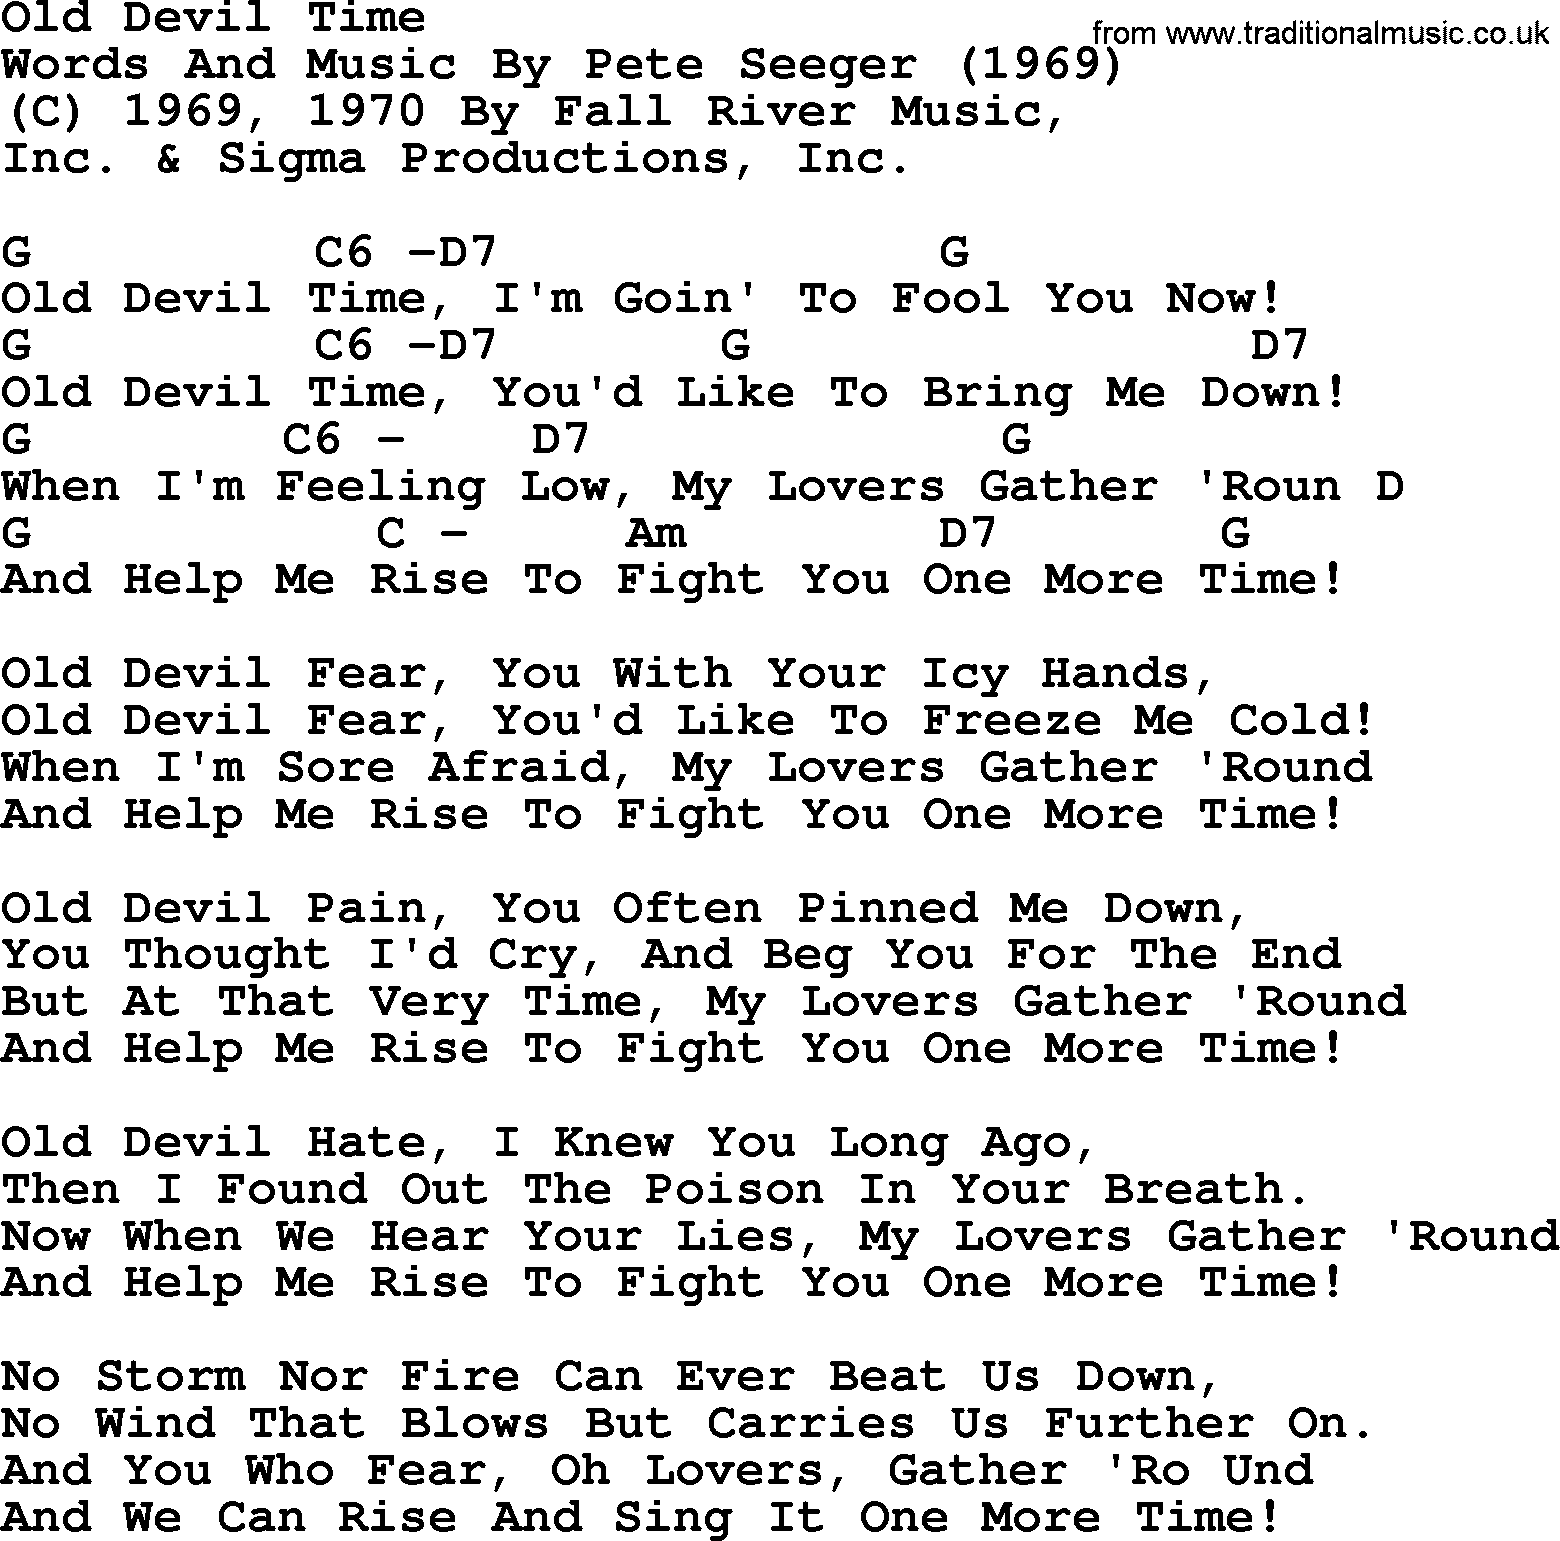 Pete Seeger song Old Devil Time, lyrics and chords